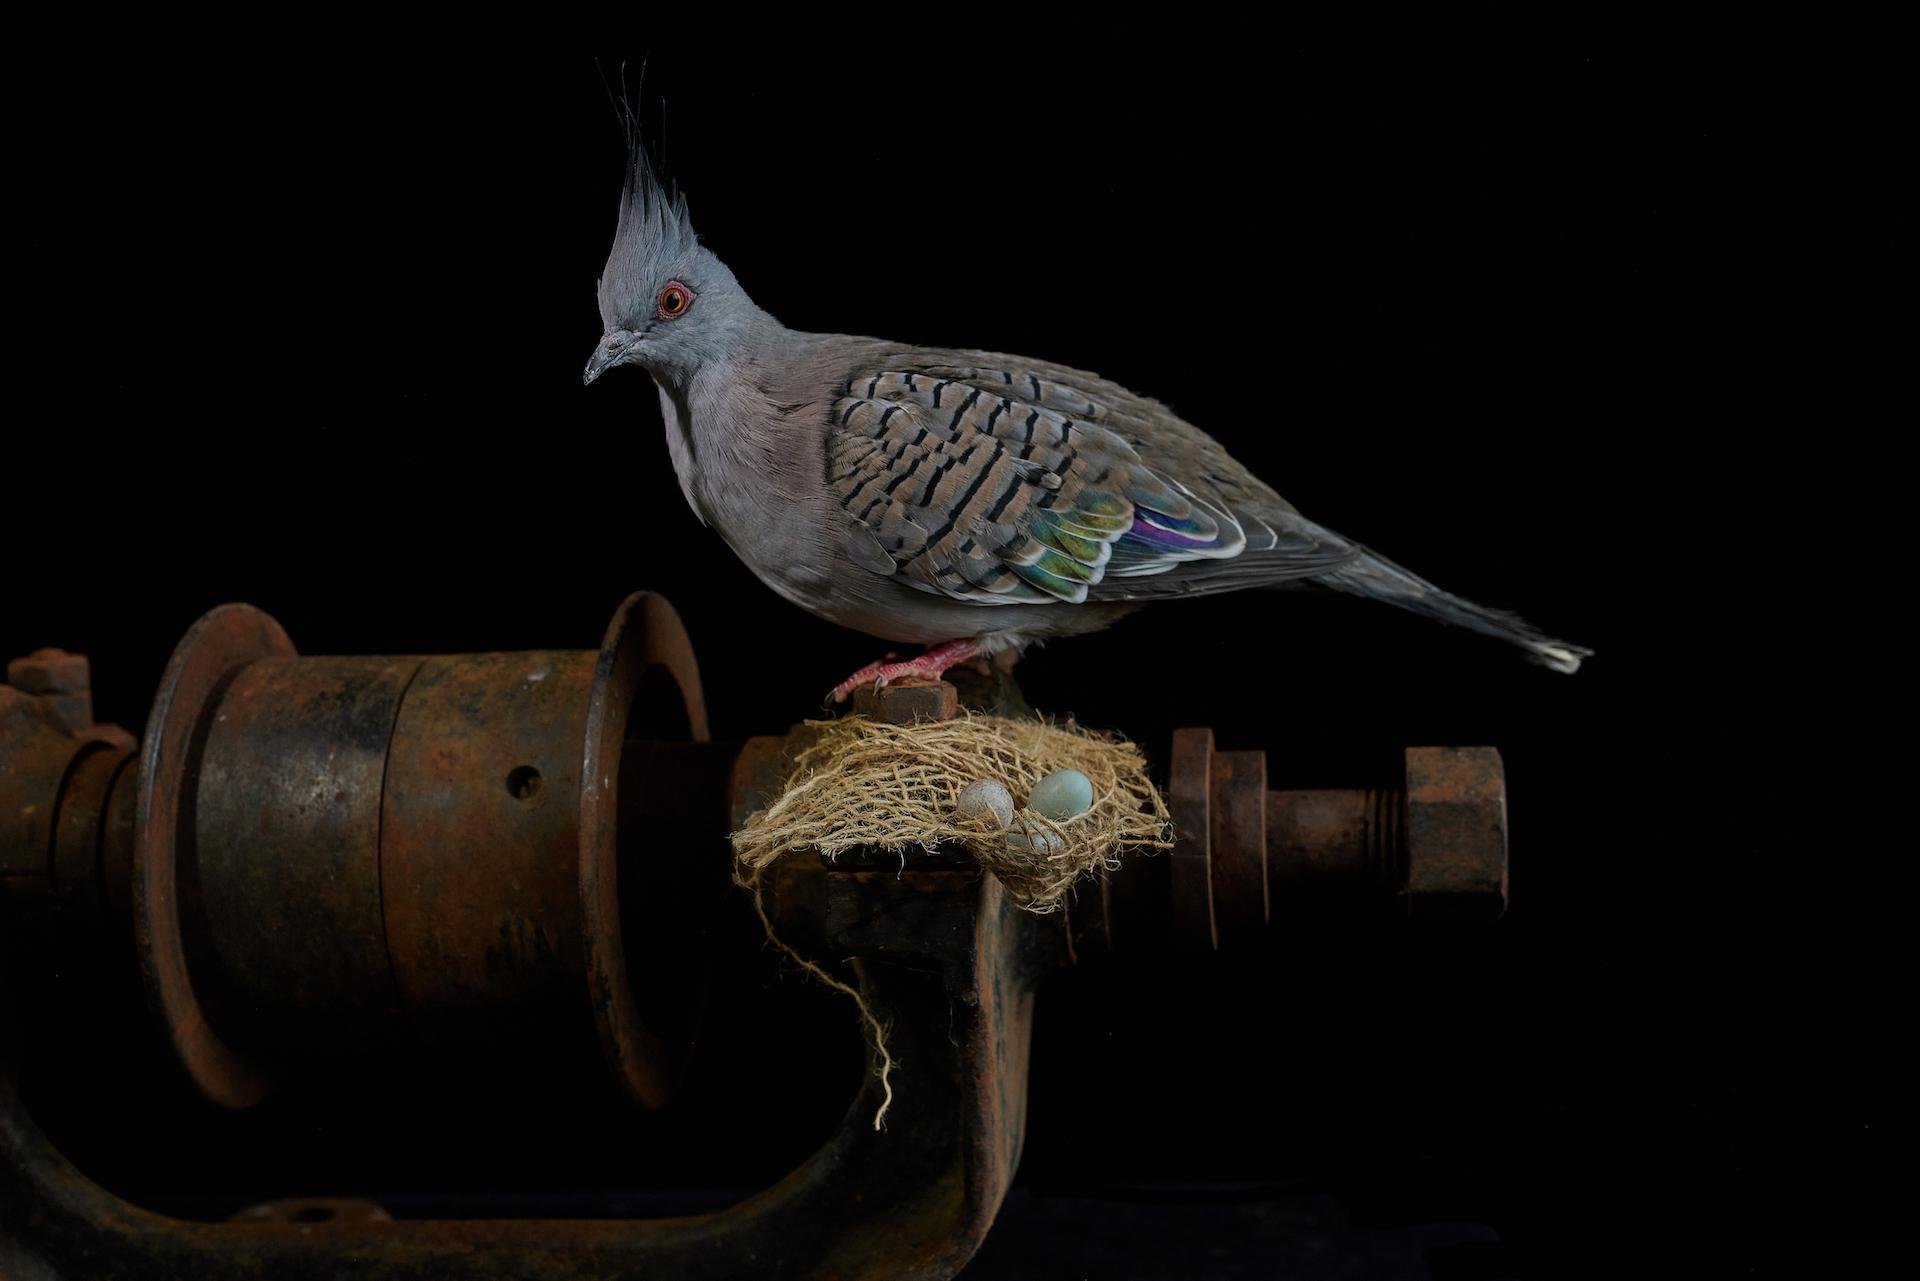 London Photography Awards Winner - Crested Dove